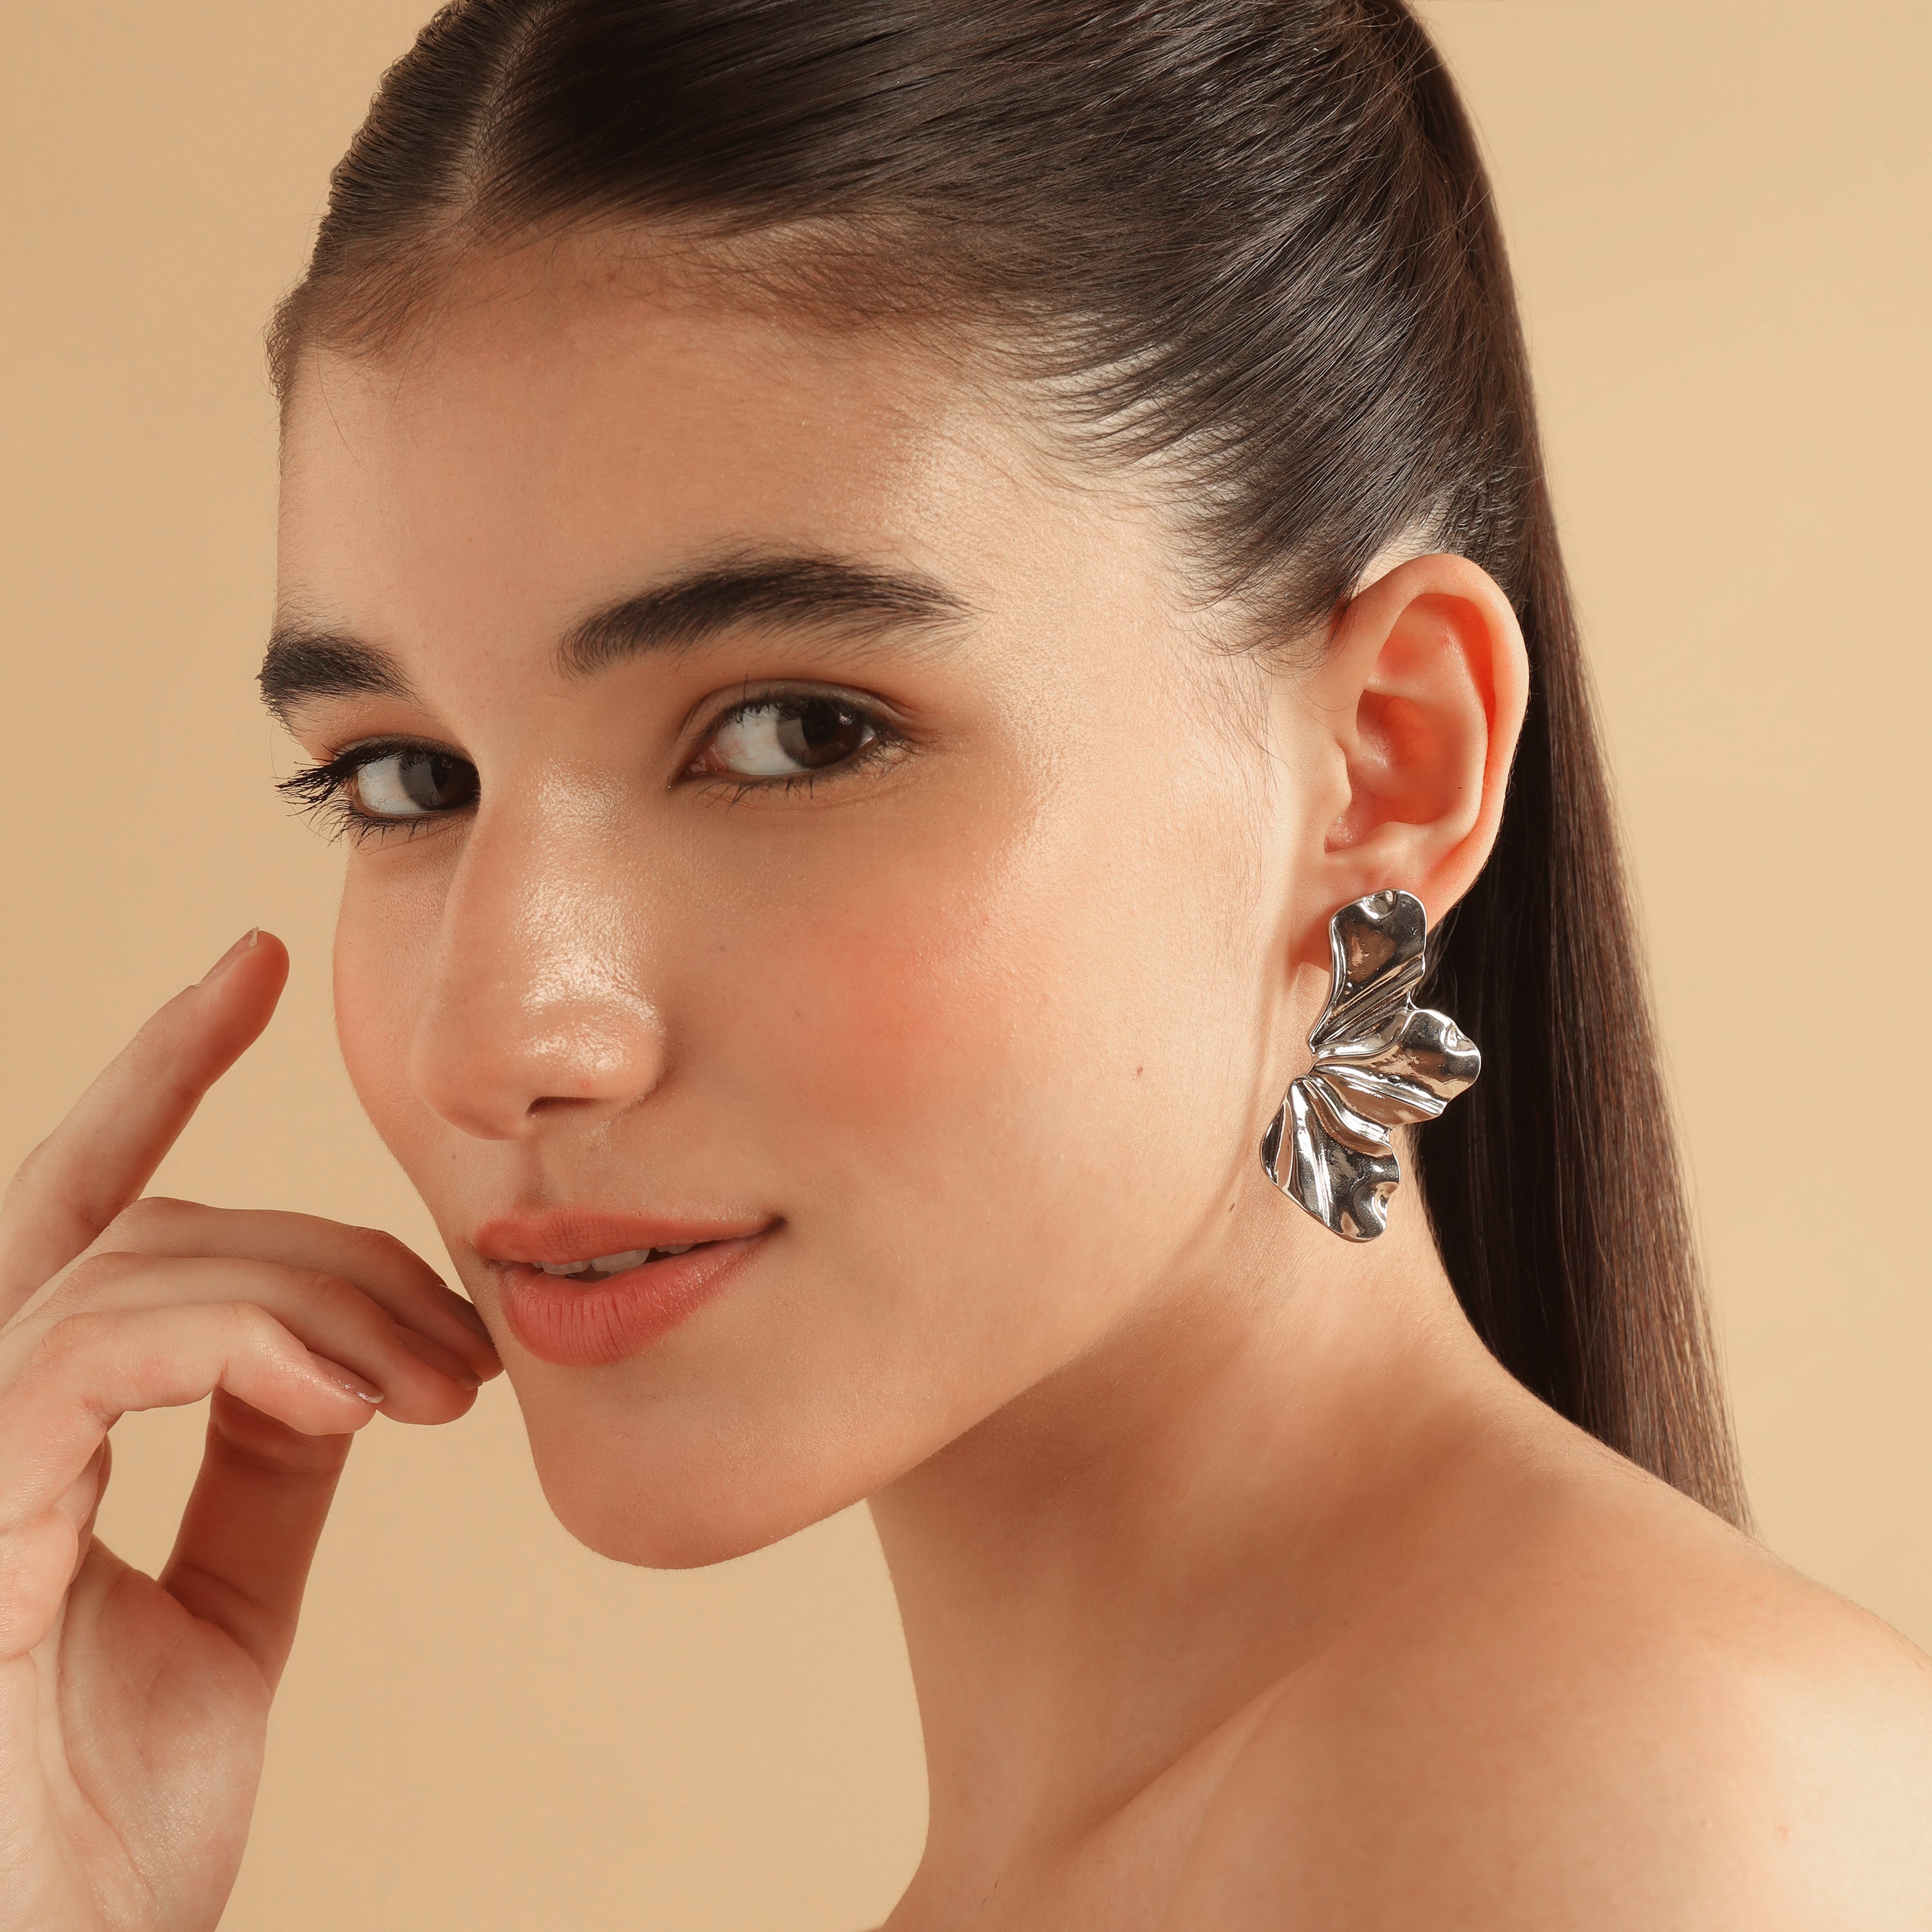 TFC Bling Blossom Silver Plated Stud Earrings